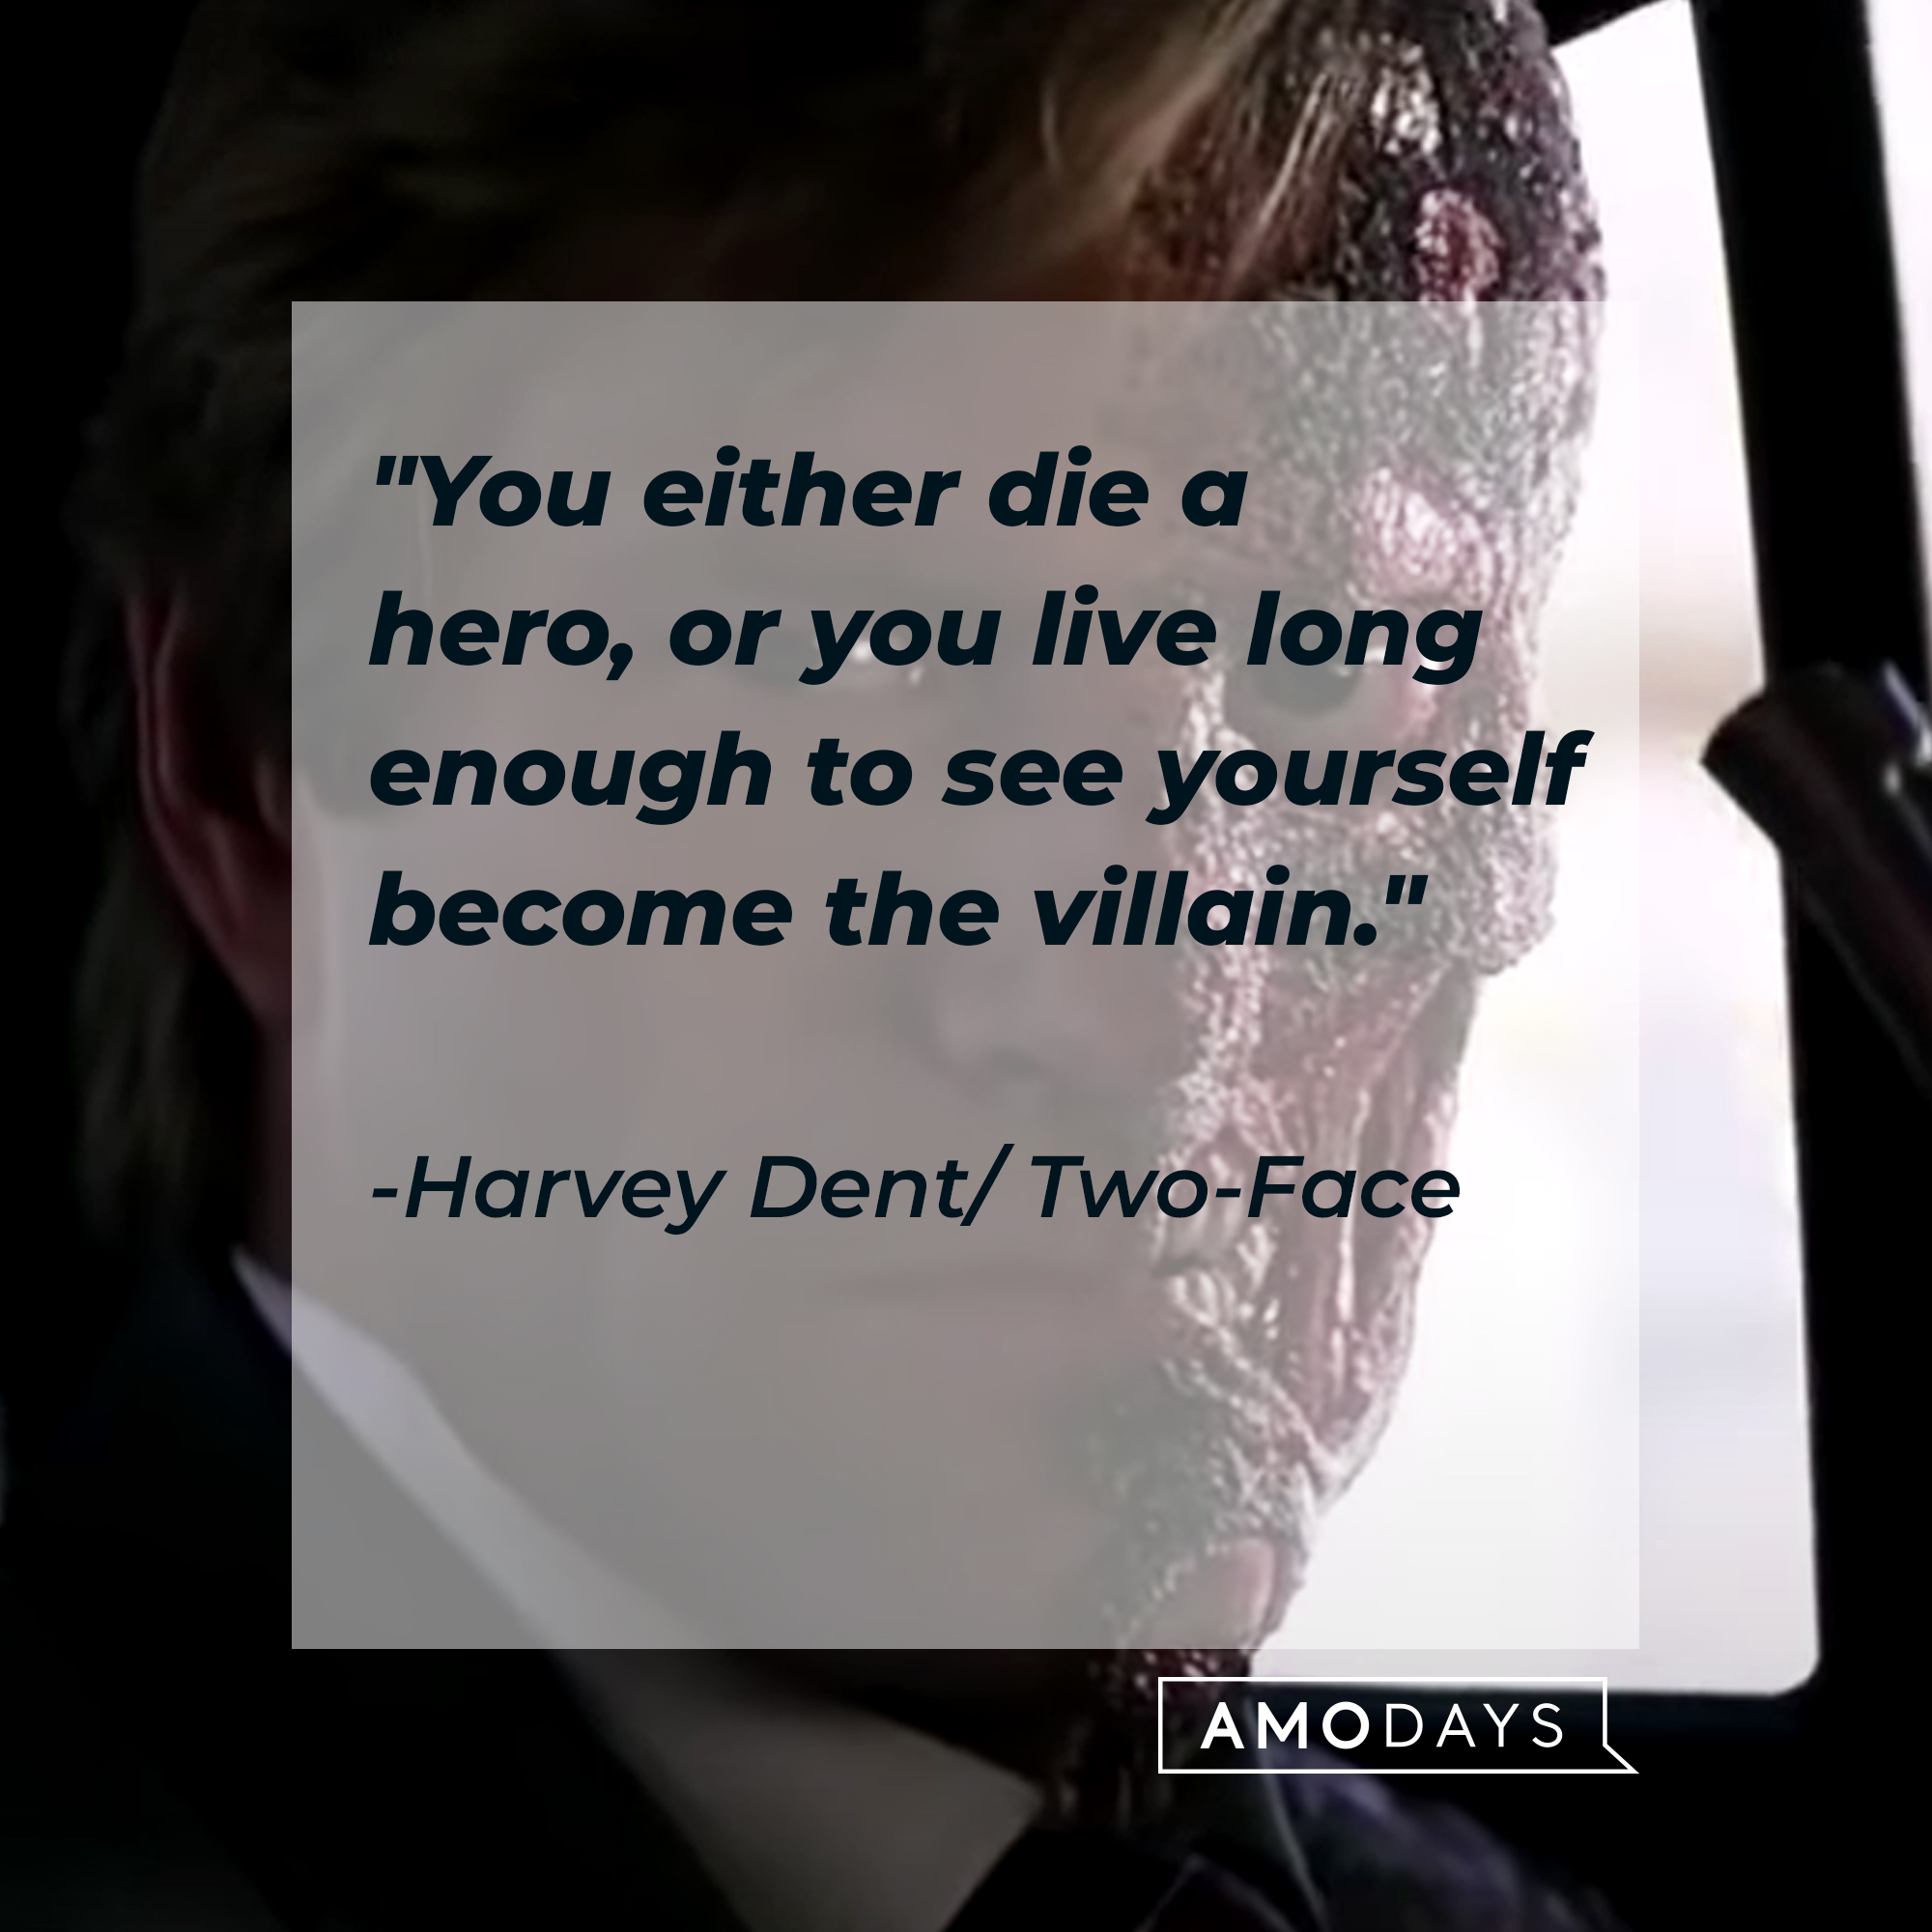 Harvey Dent/Two-Face's quote: "You either die a hero, or you live long enough to see yourself become the villain." | Source: facebook.com/dc